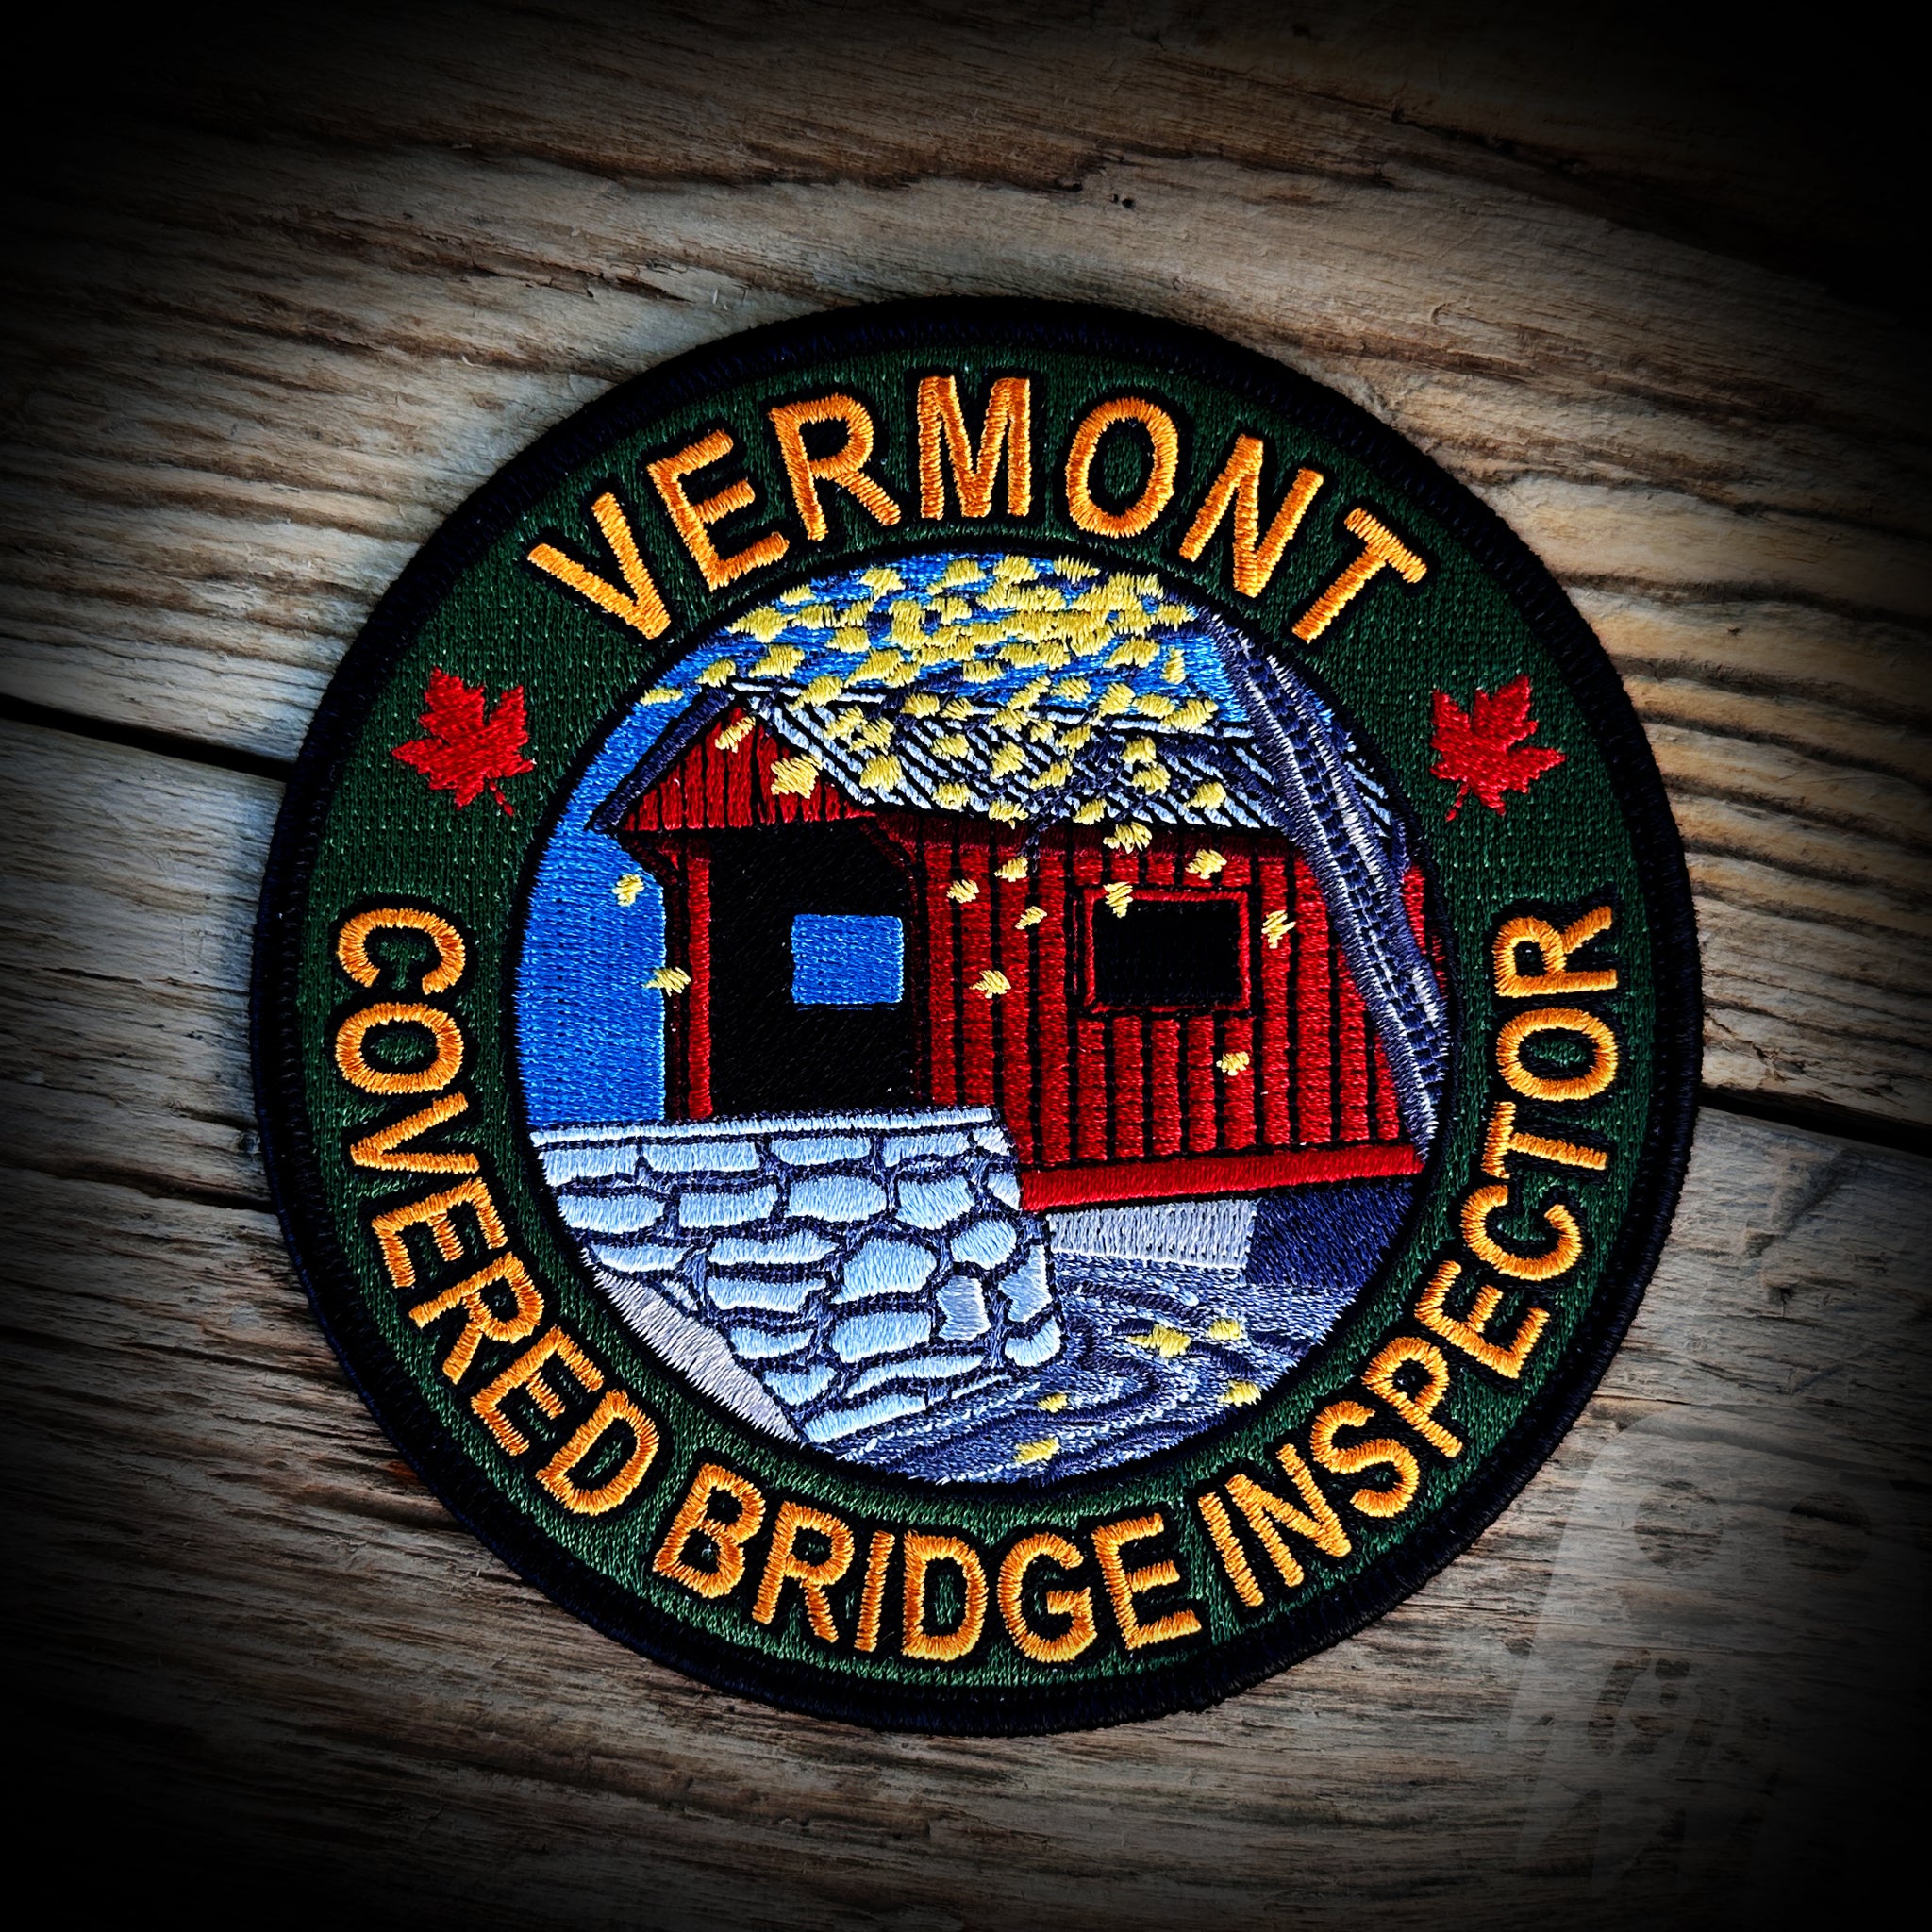 State of Vermont Covered Bridge Inspector Patch - Very Rare